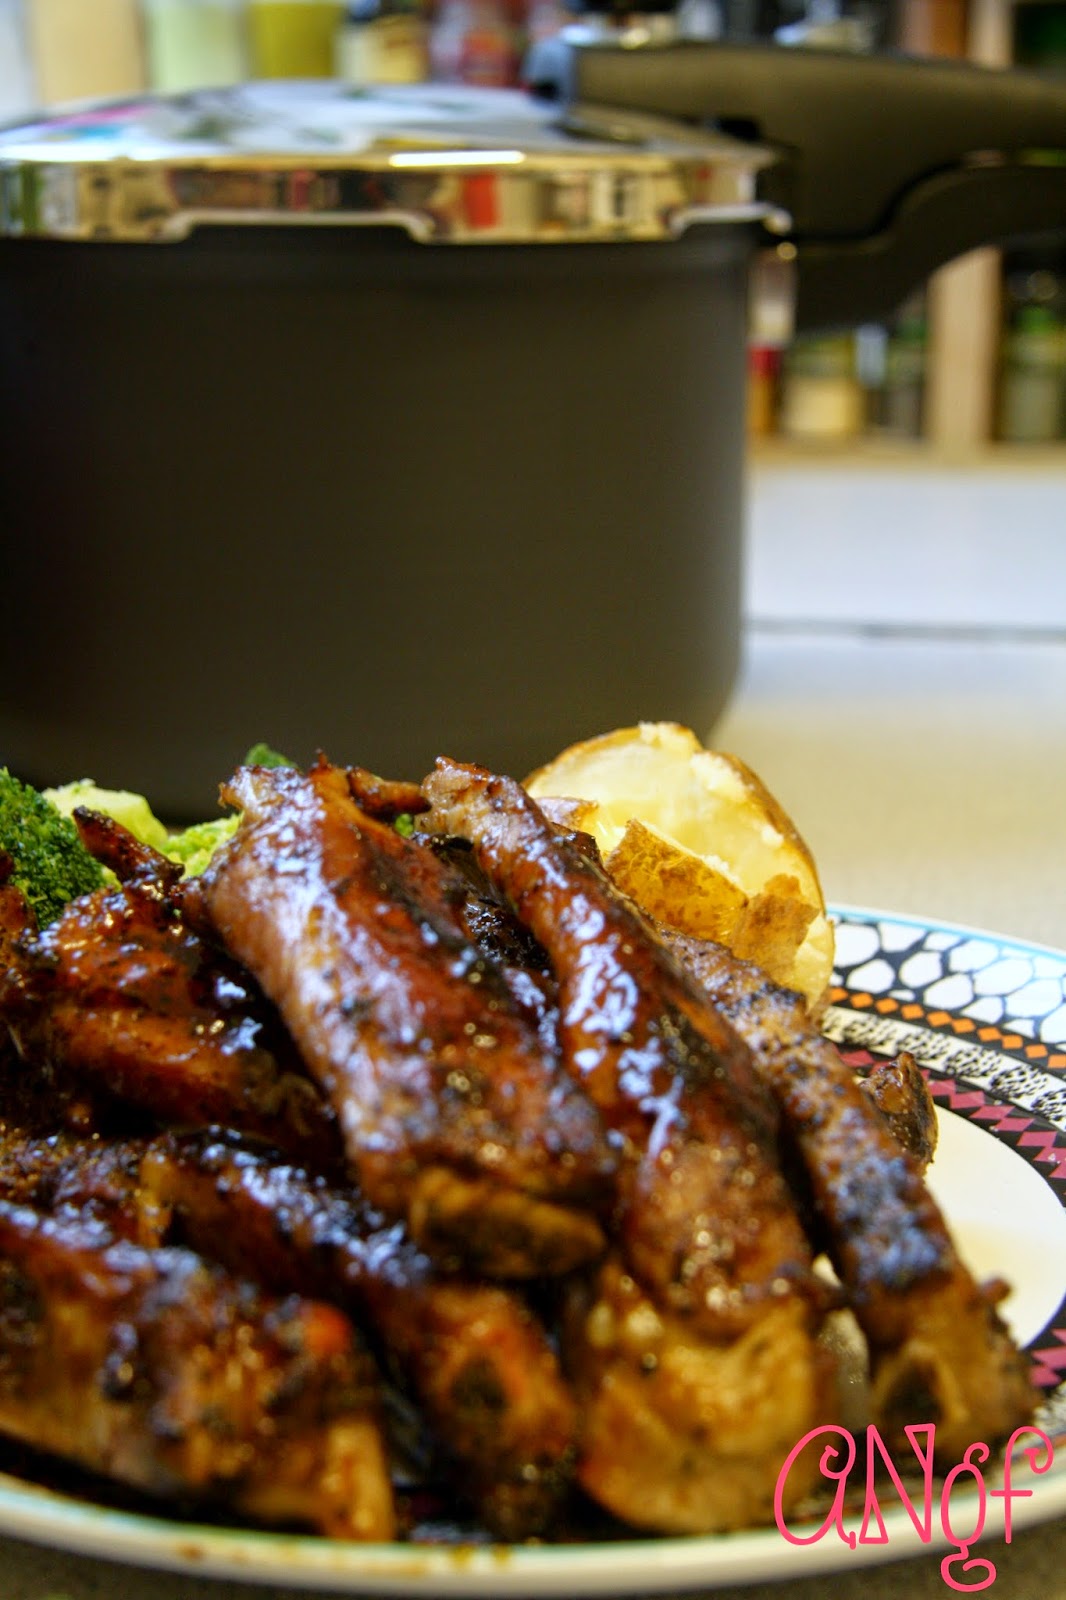 Plate of Pressure Cooker Barbecue Ribs from Anyonita-nibbles.co.uk